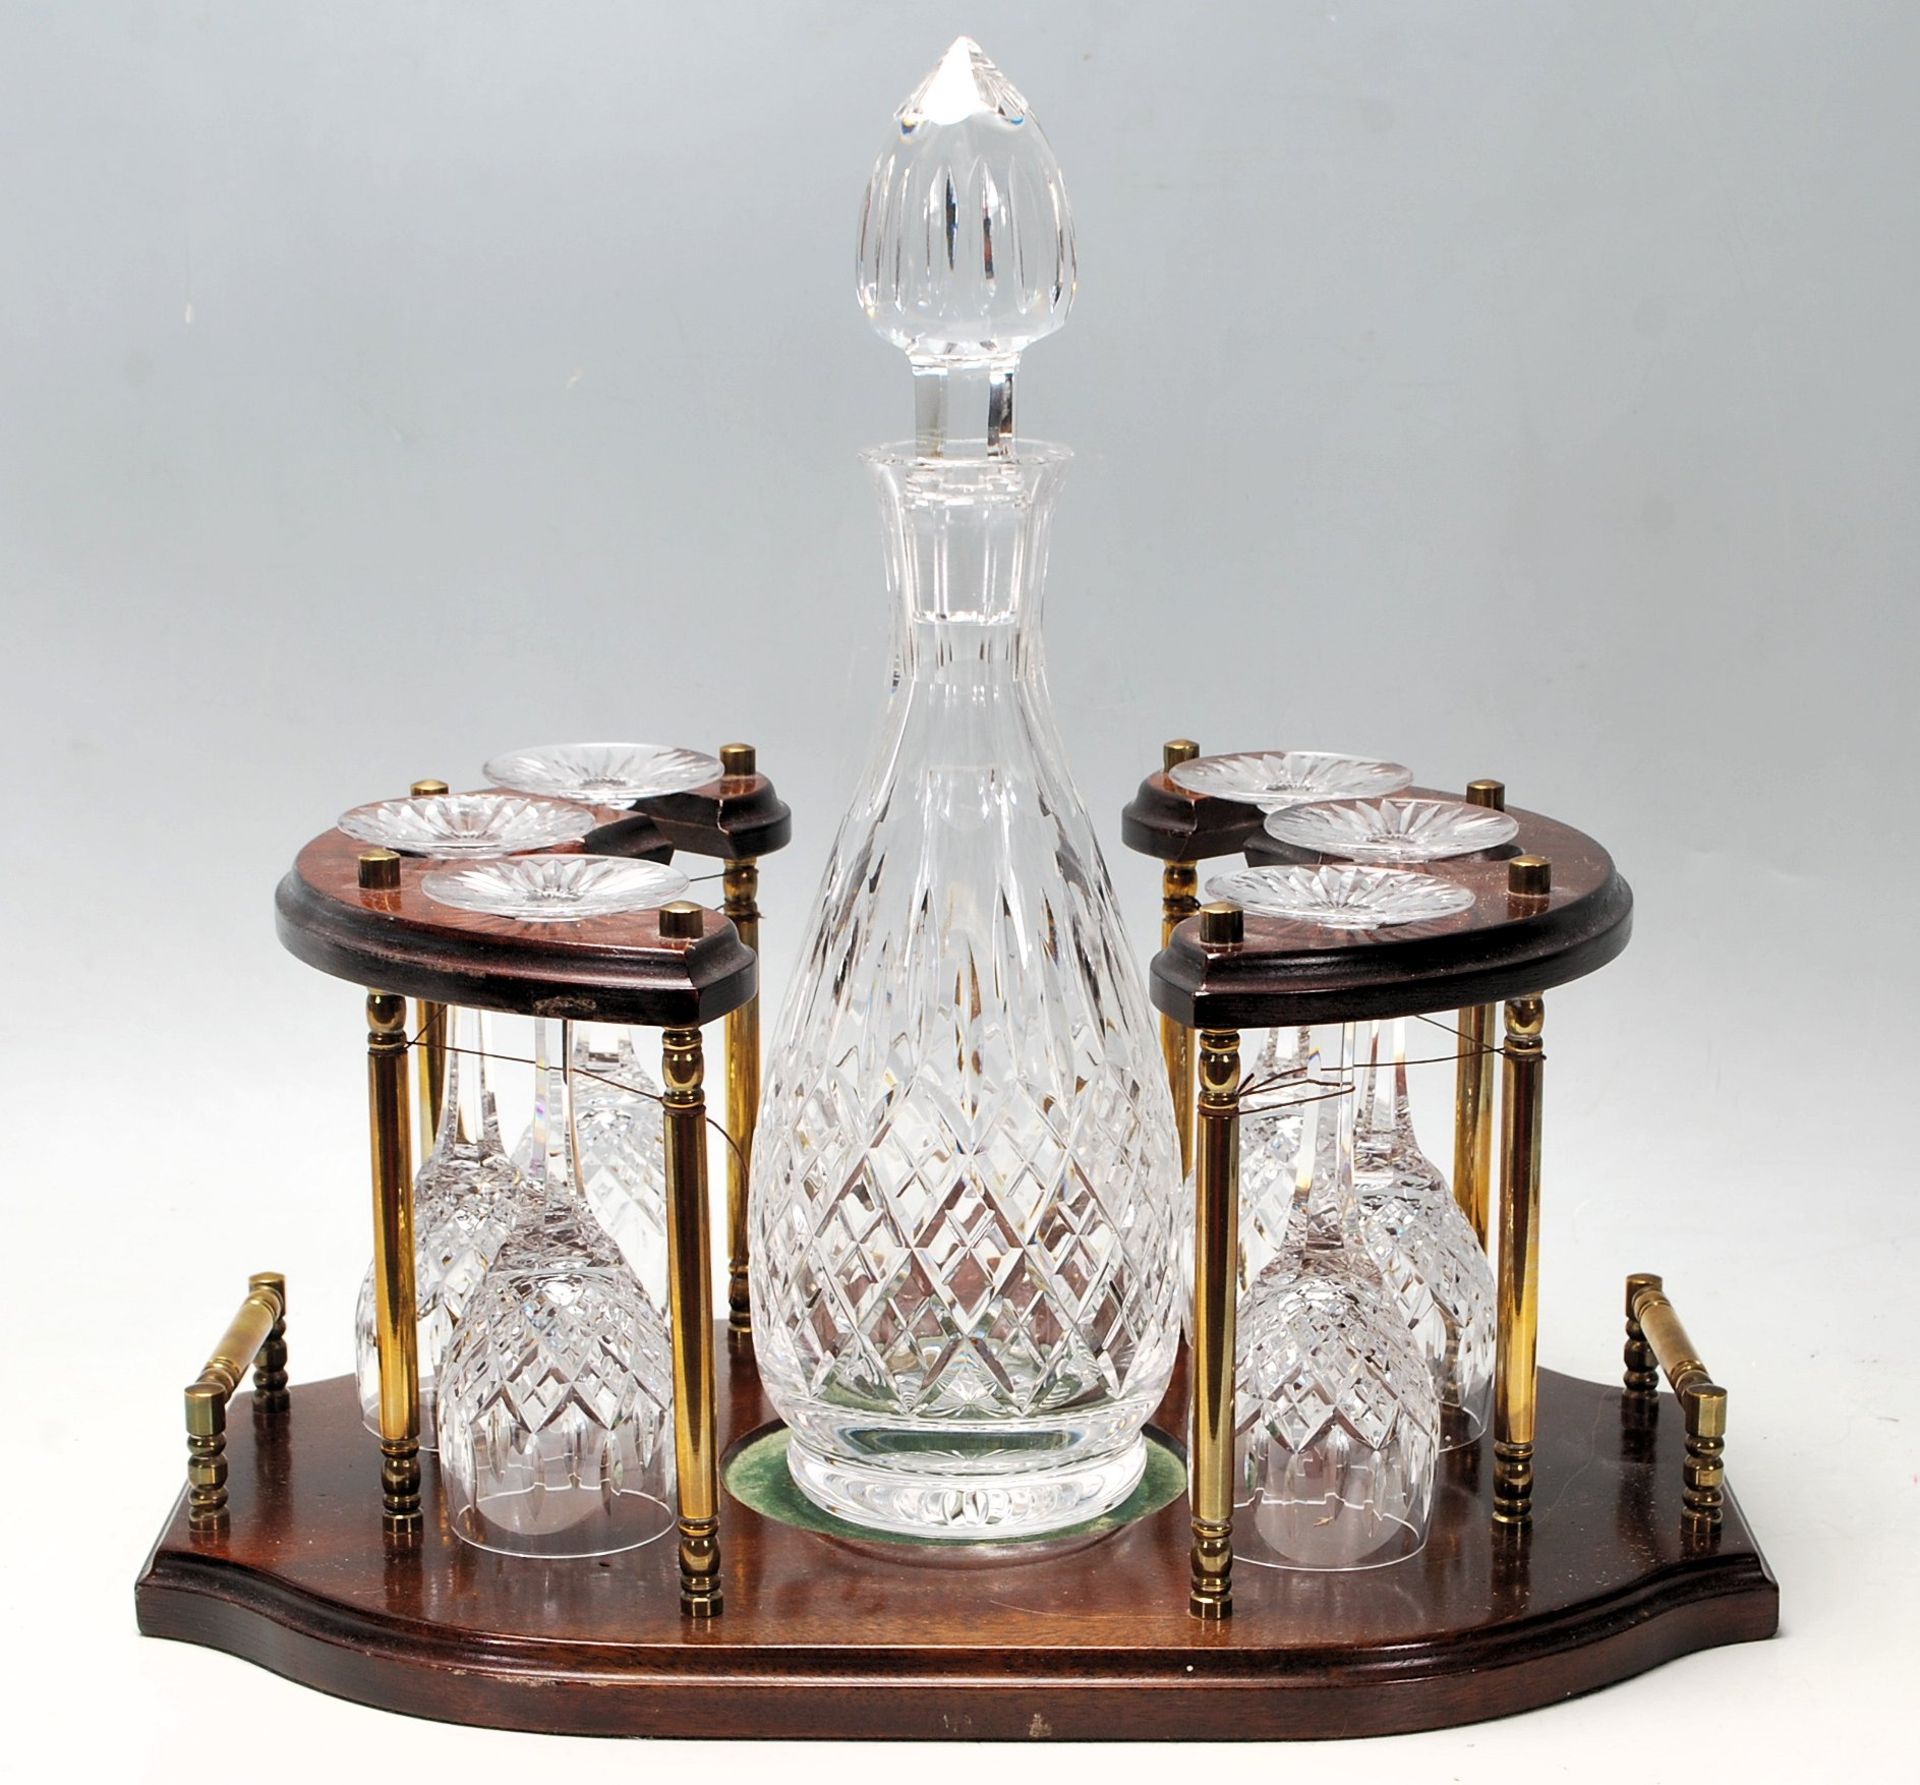 A 20th Century vintage cut glass decanter and glass set consisting of a bottle decanter complete